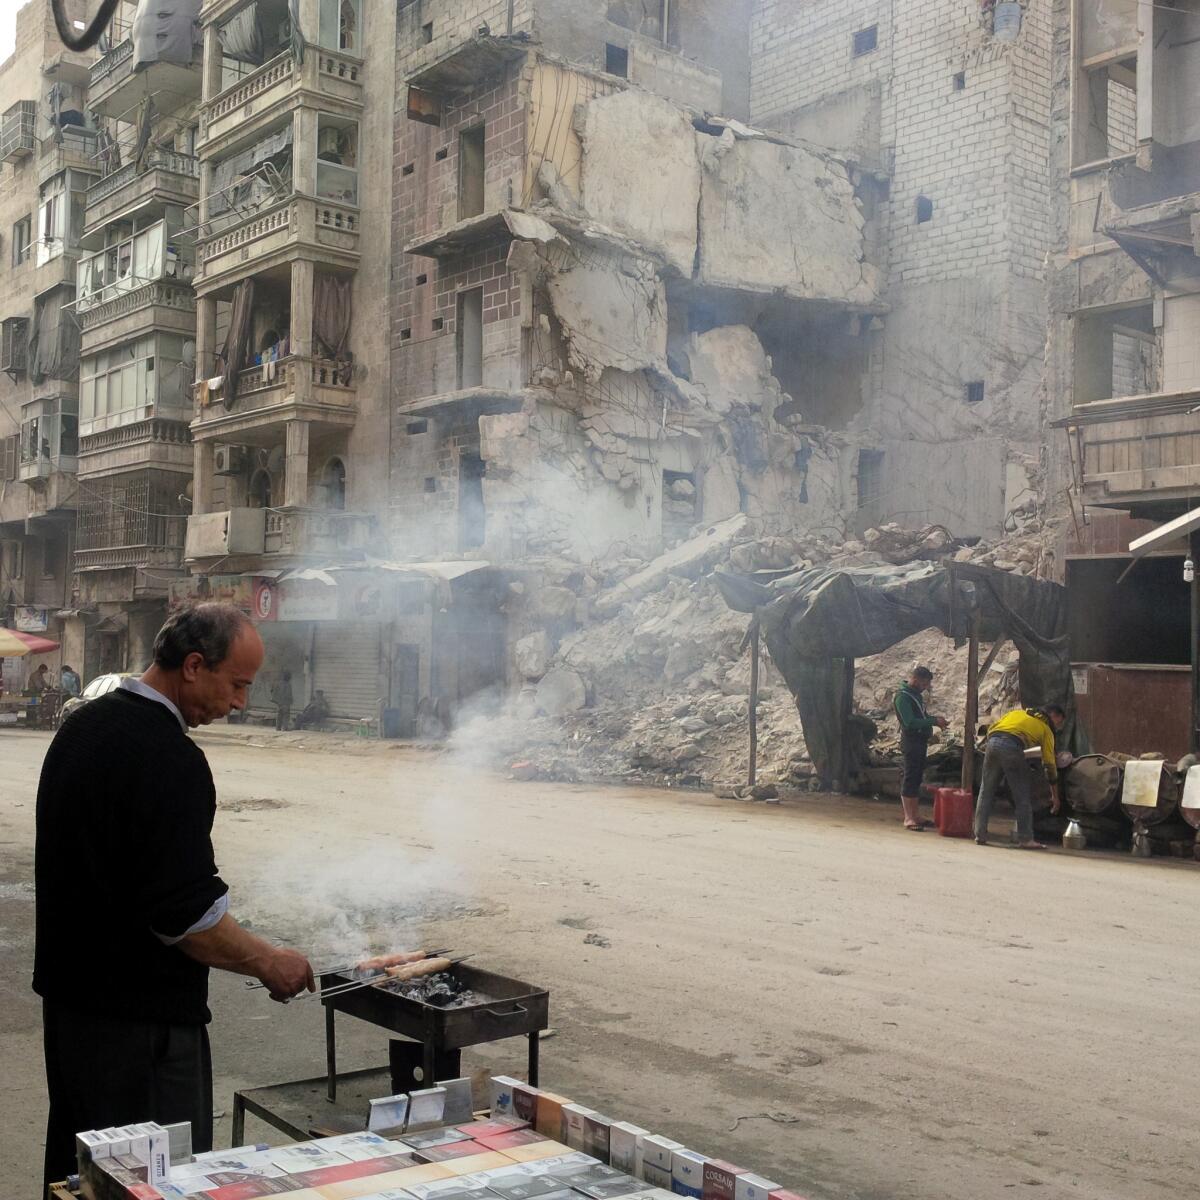 In Aleppo, Syria's largest city, a kebab vendor works in the midst of a destroyed building. As Syria's war rages on, Aleppo is a city under gradual demolition, with a shrinking civilian population struggling to survive.